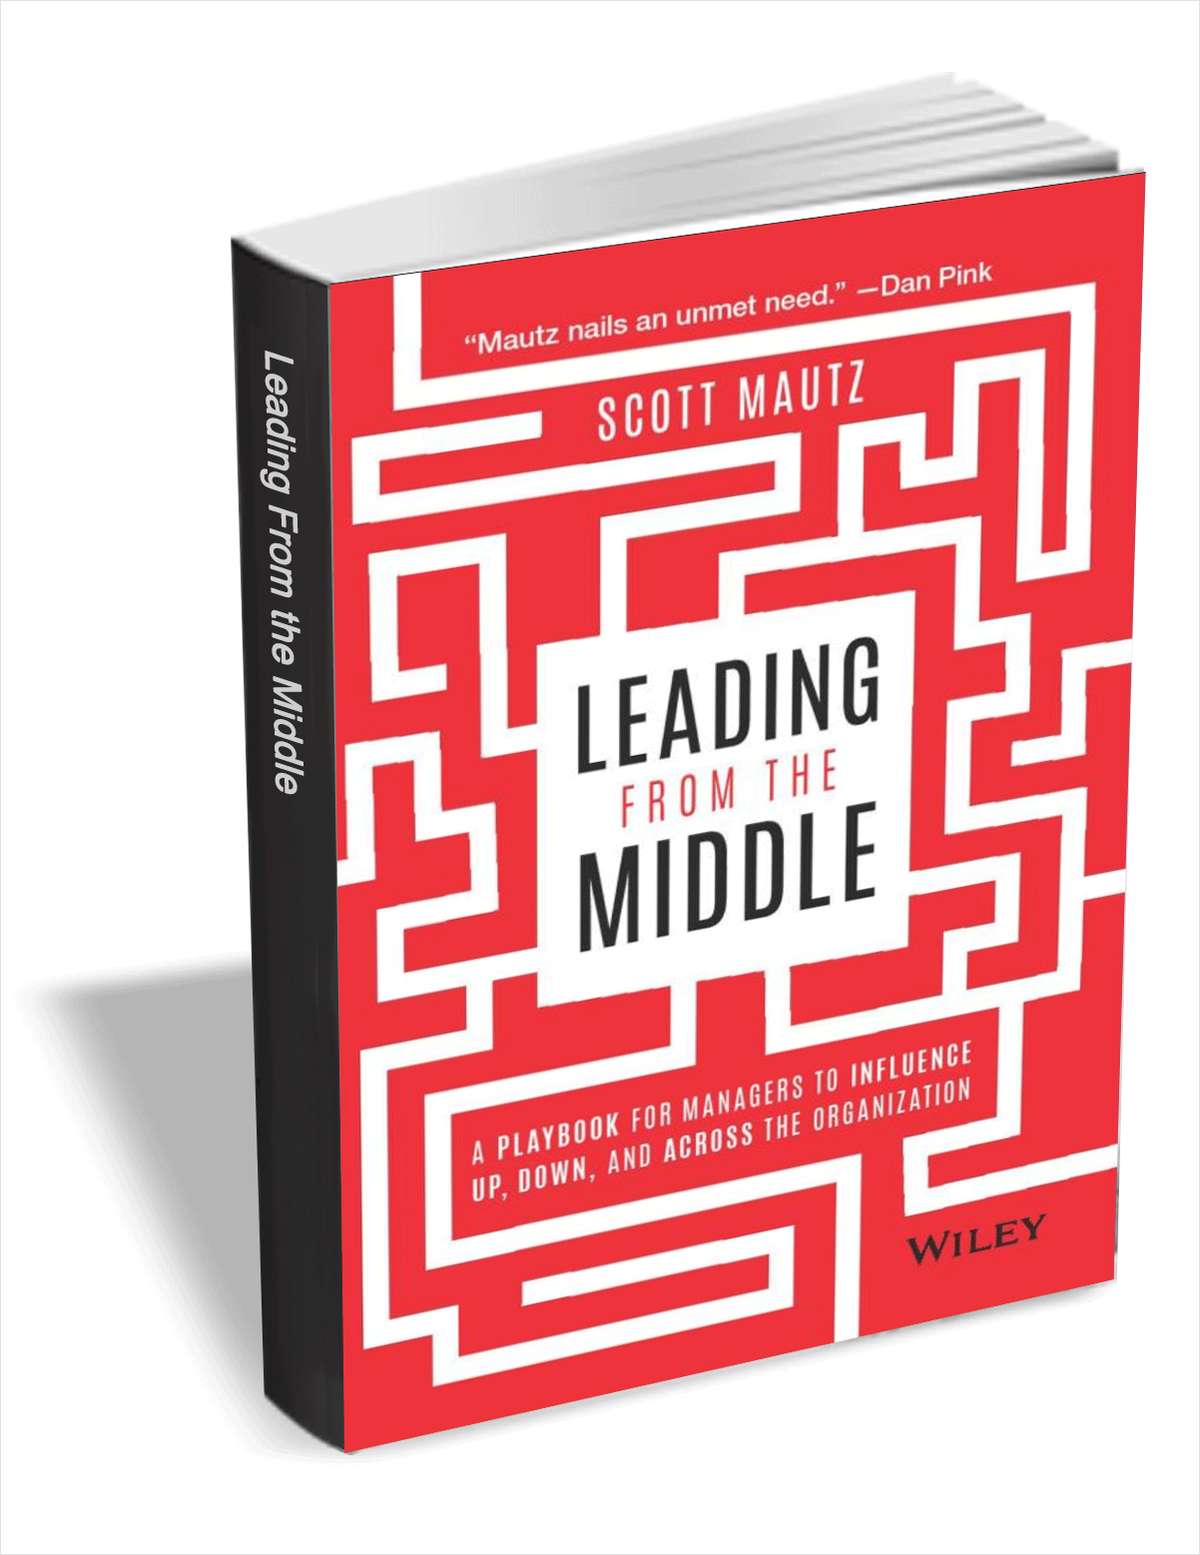 Leading from the Middle: A Playbook for Managers to Influence Up, Down, and Across the Organization ($15.00 Value) FREE for a Limited Time